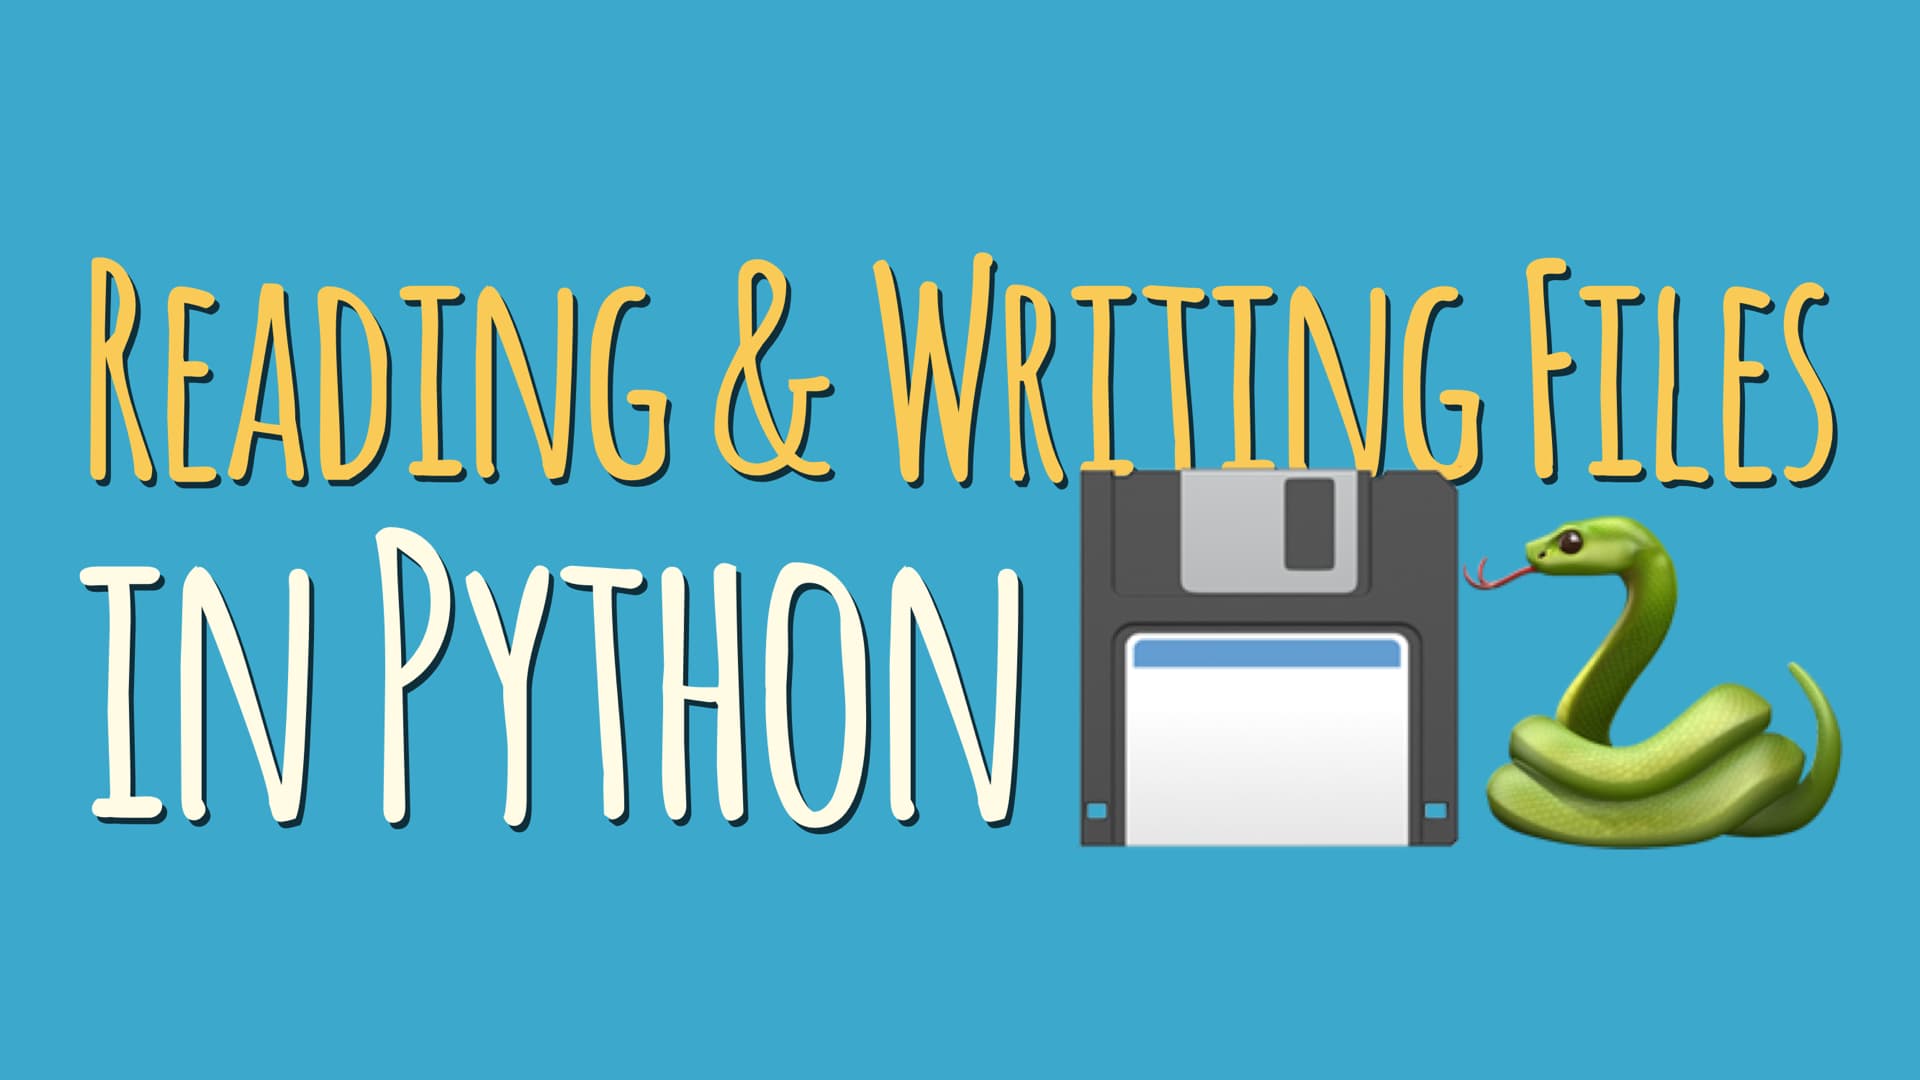 Working With File I/O in Python